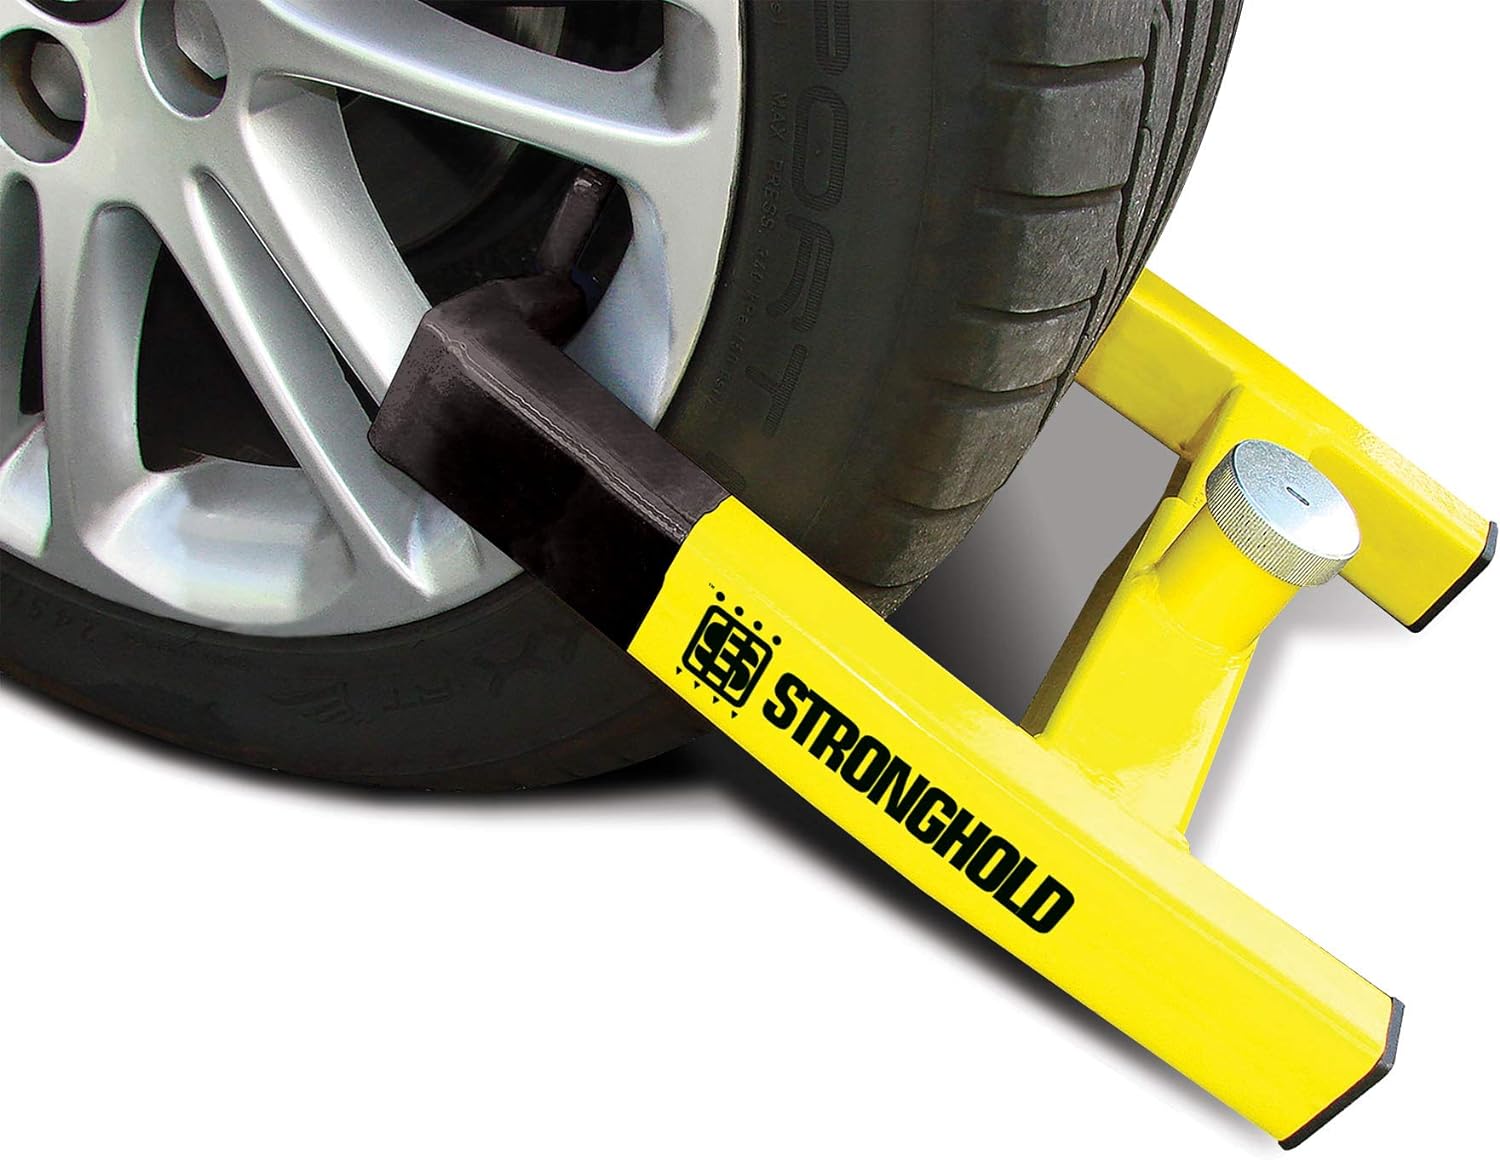 Stronghold Atlas Caravan & Trailer Wheel Clamp Fits Alloy and Steel Wheels with Tyres Up To 265 mm Wide Sold Secure Gold Standard